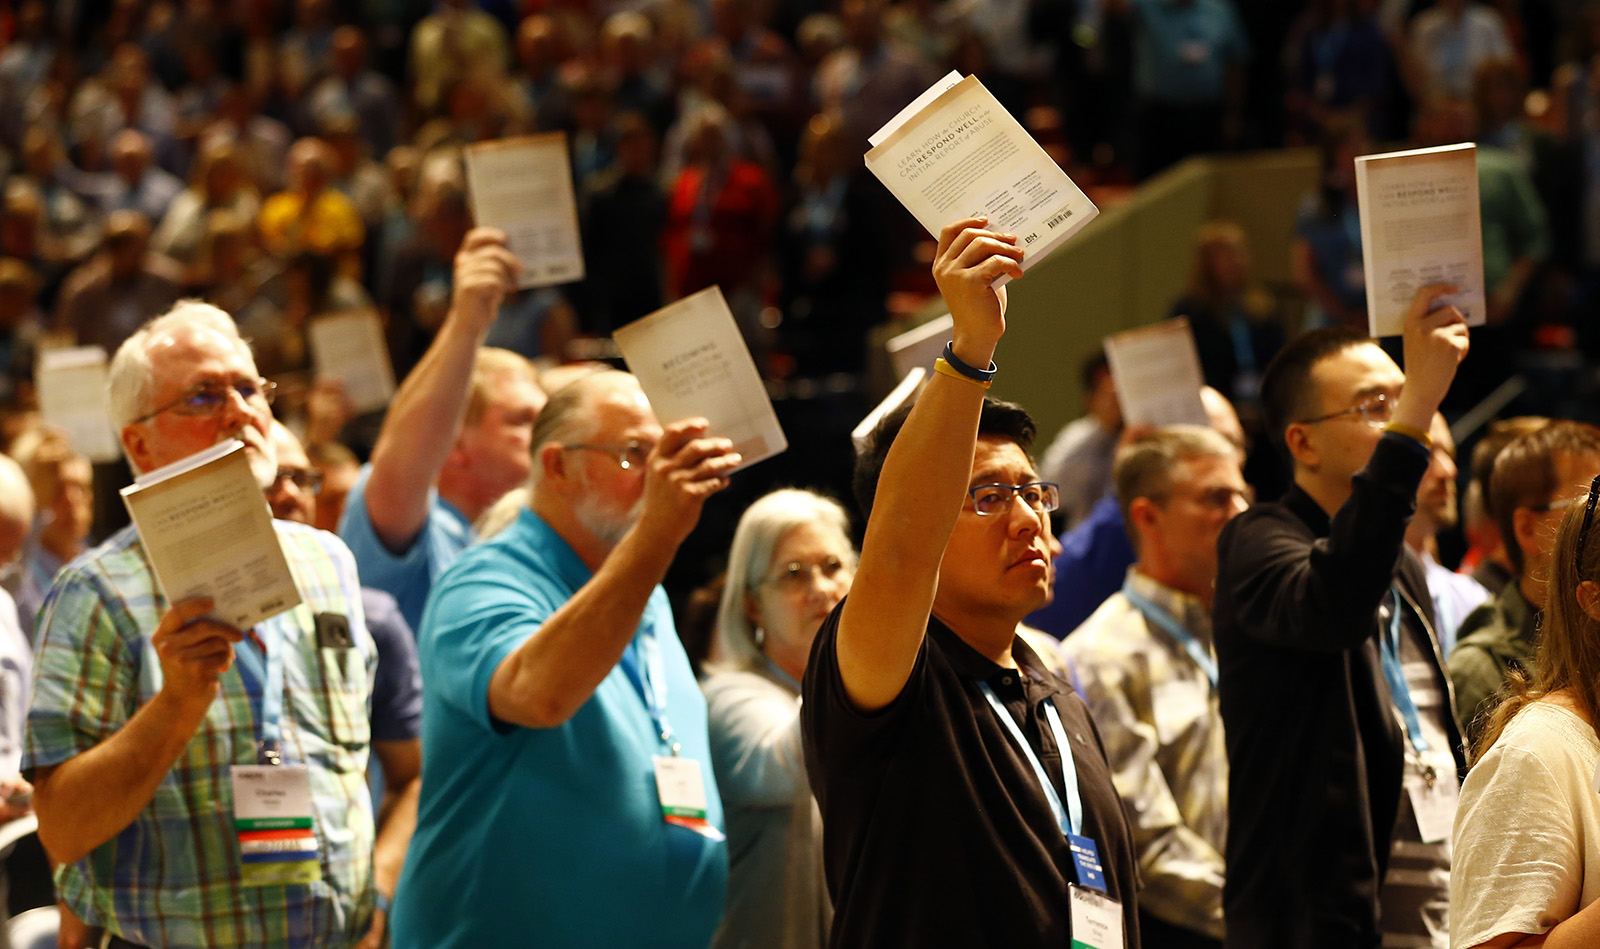 Messengers hold up SBC abuse handbooks while taking a challenge to stop sexual abuse during the annual meeting of the Southern Baptist Convention at the Birmingham-Jefferson Convention Complex, June 12, 2019, in Birmingham, Alabama. RNS photo by Butch Dill